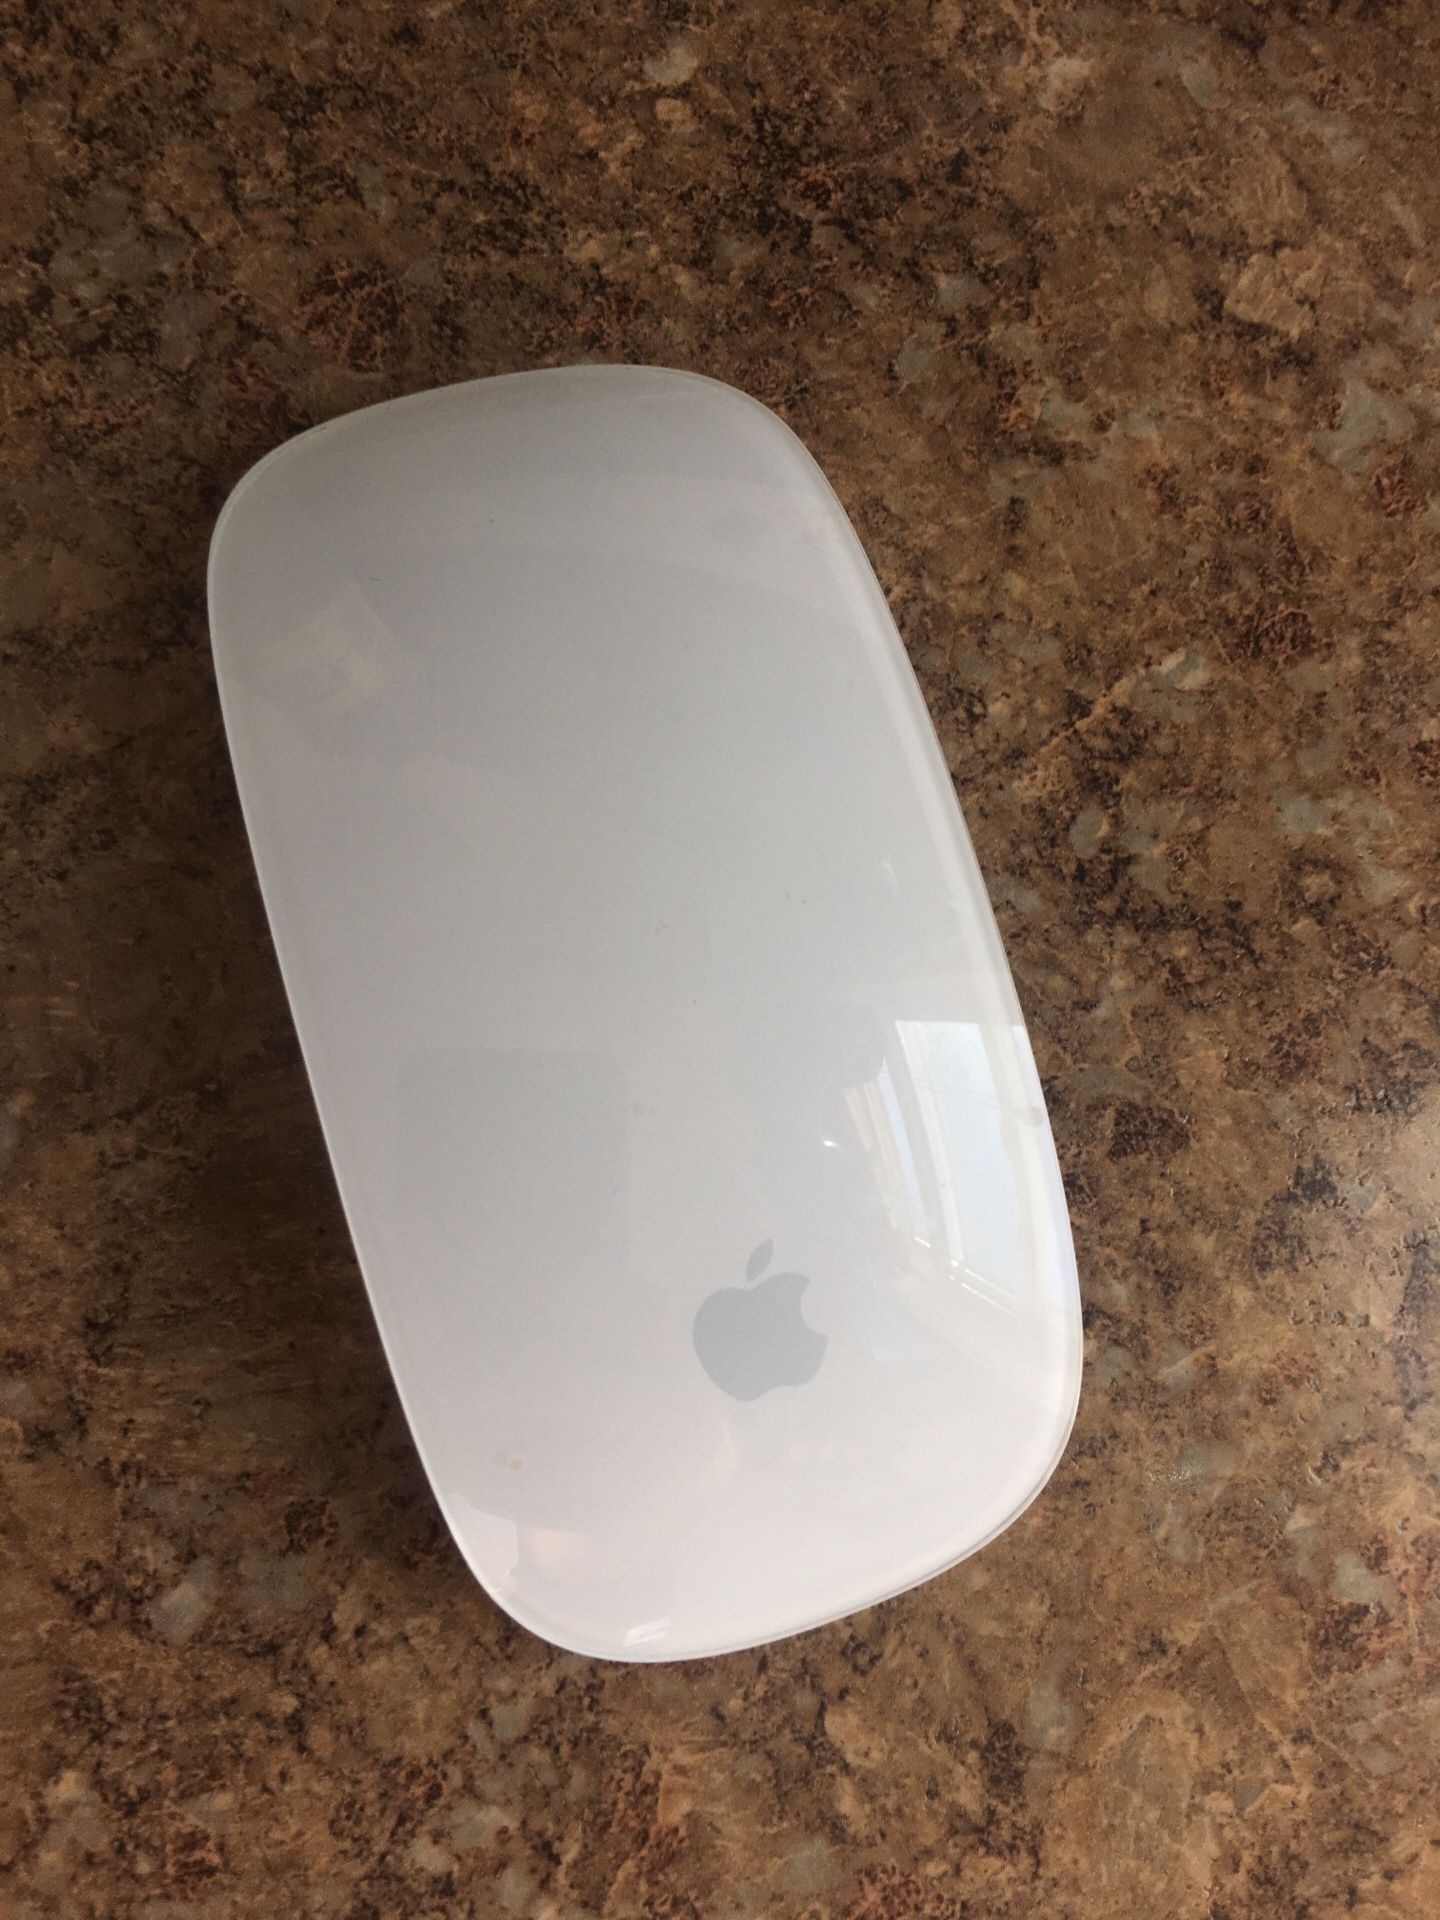 Apple wireless mouse